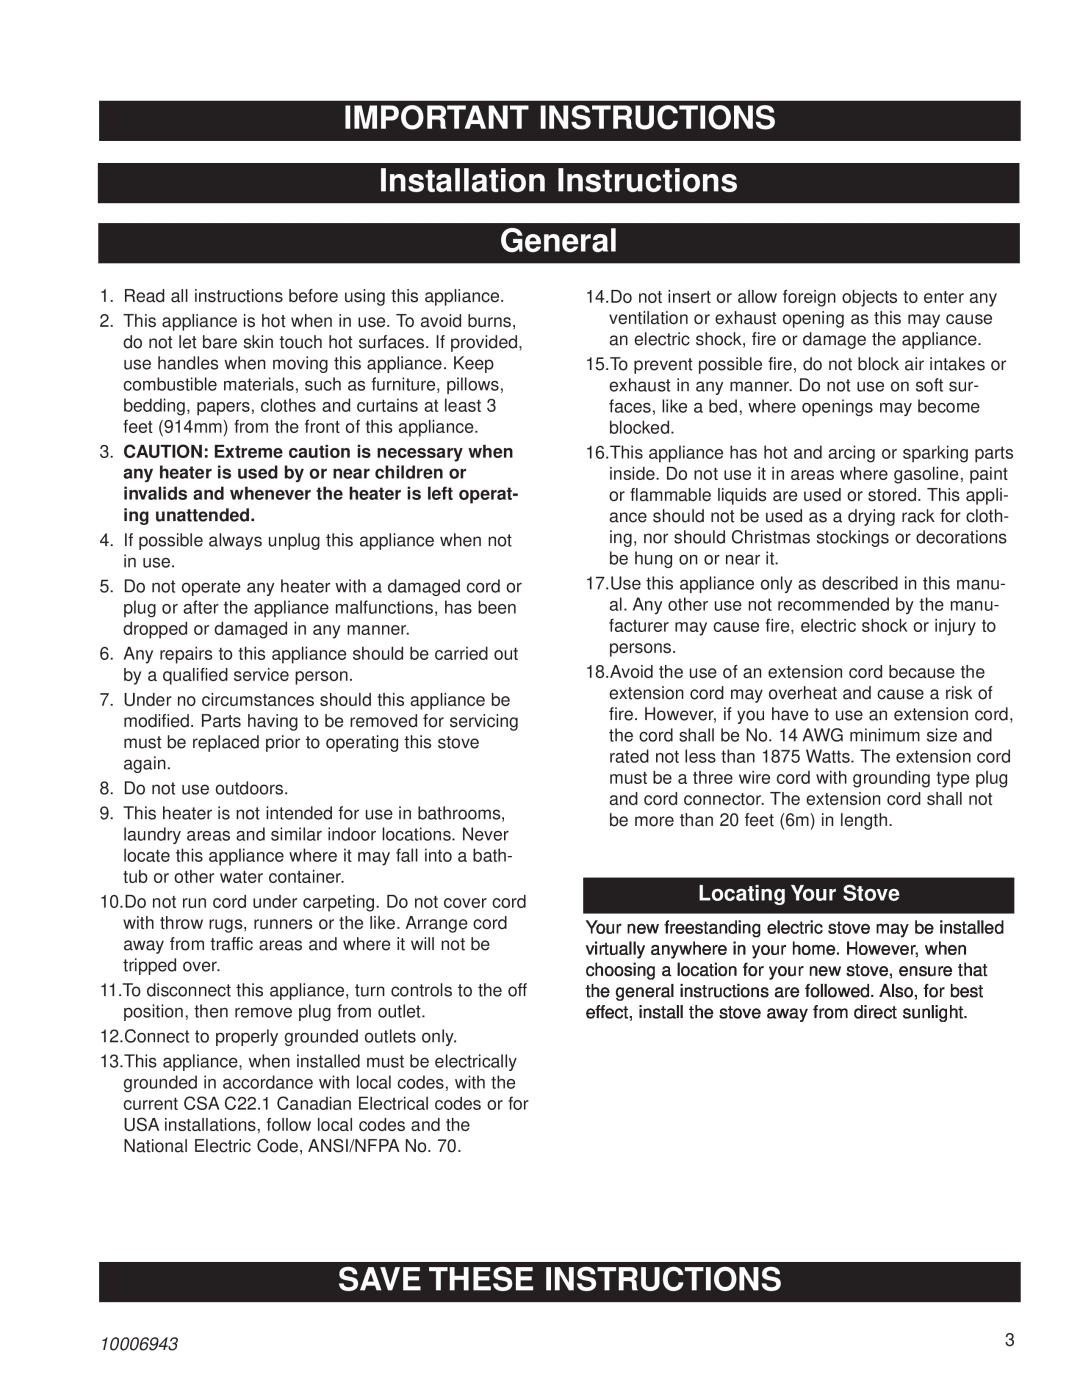 Century HES60 IMPORTANT INSTRUCTIONS Installation Instructions General, Save These Instructions, Locating Your Stove 